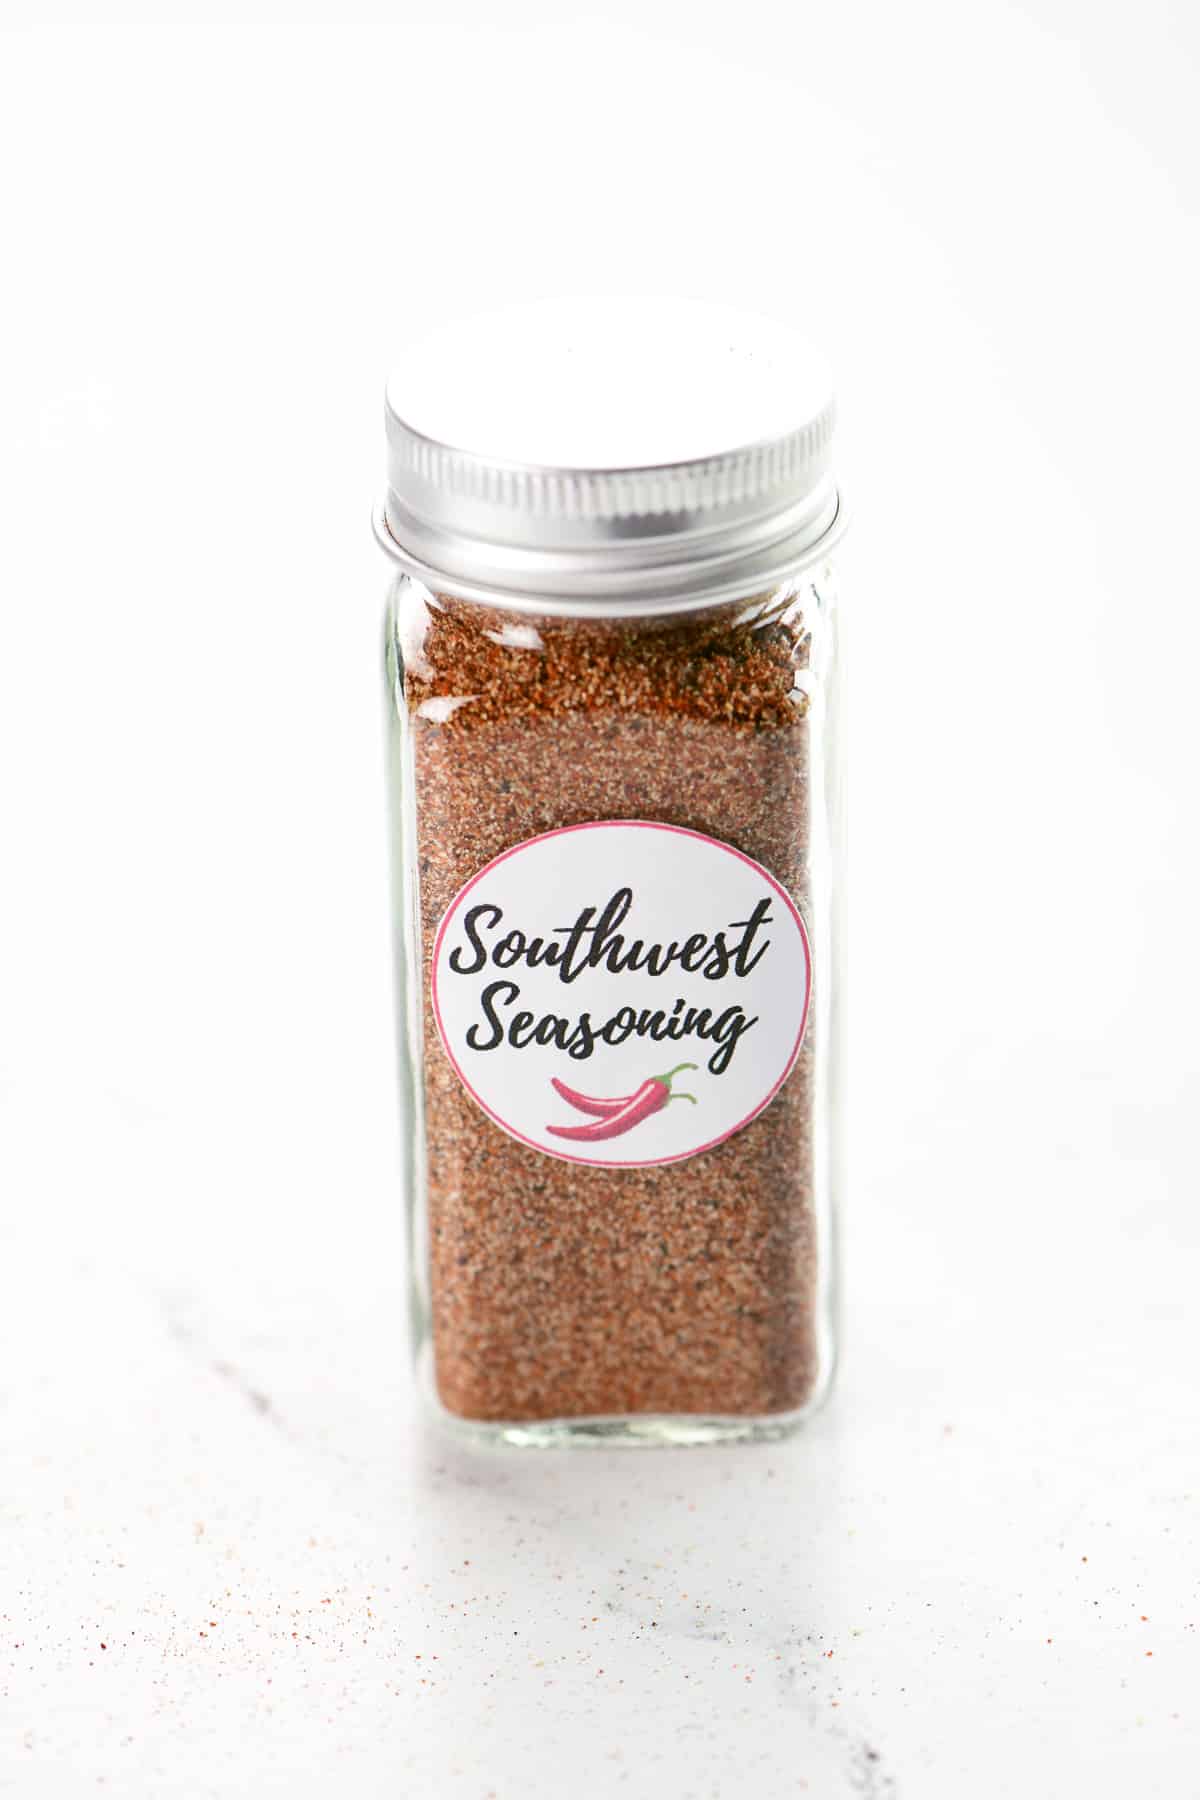 Southwest spice blend in jar with a label.